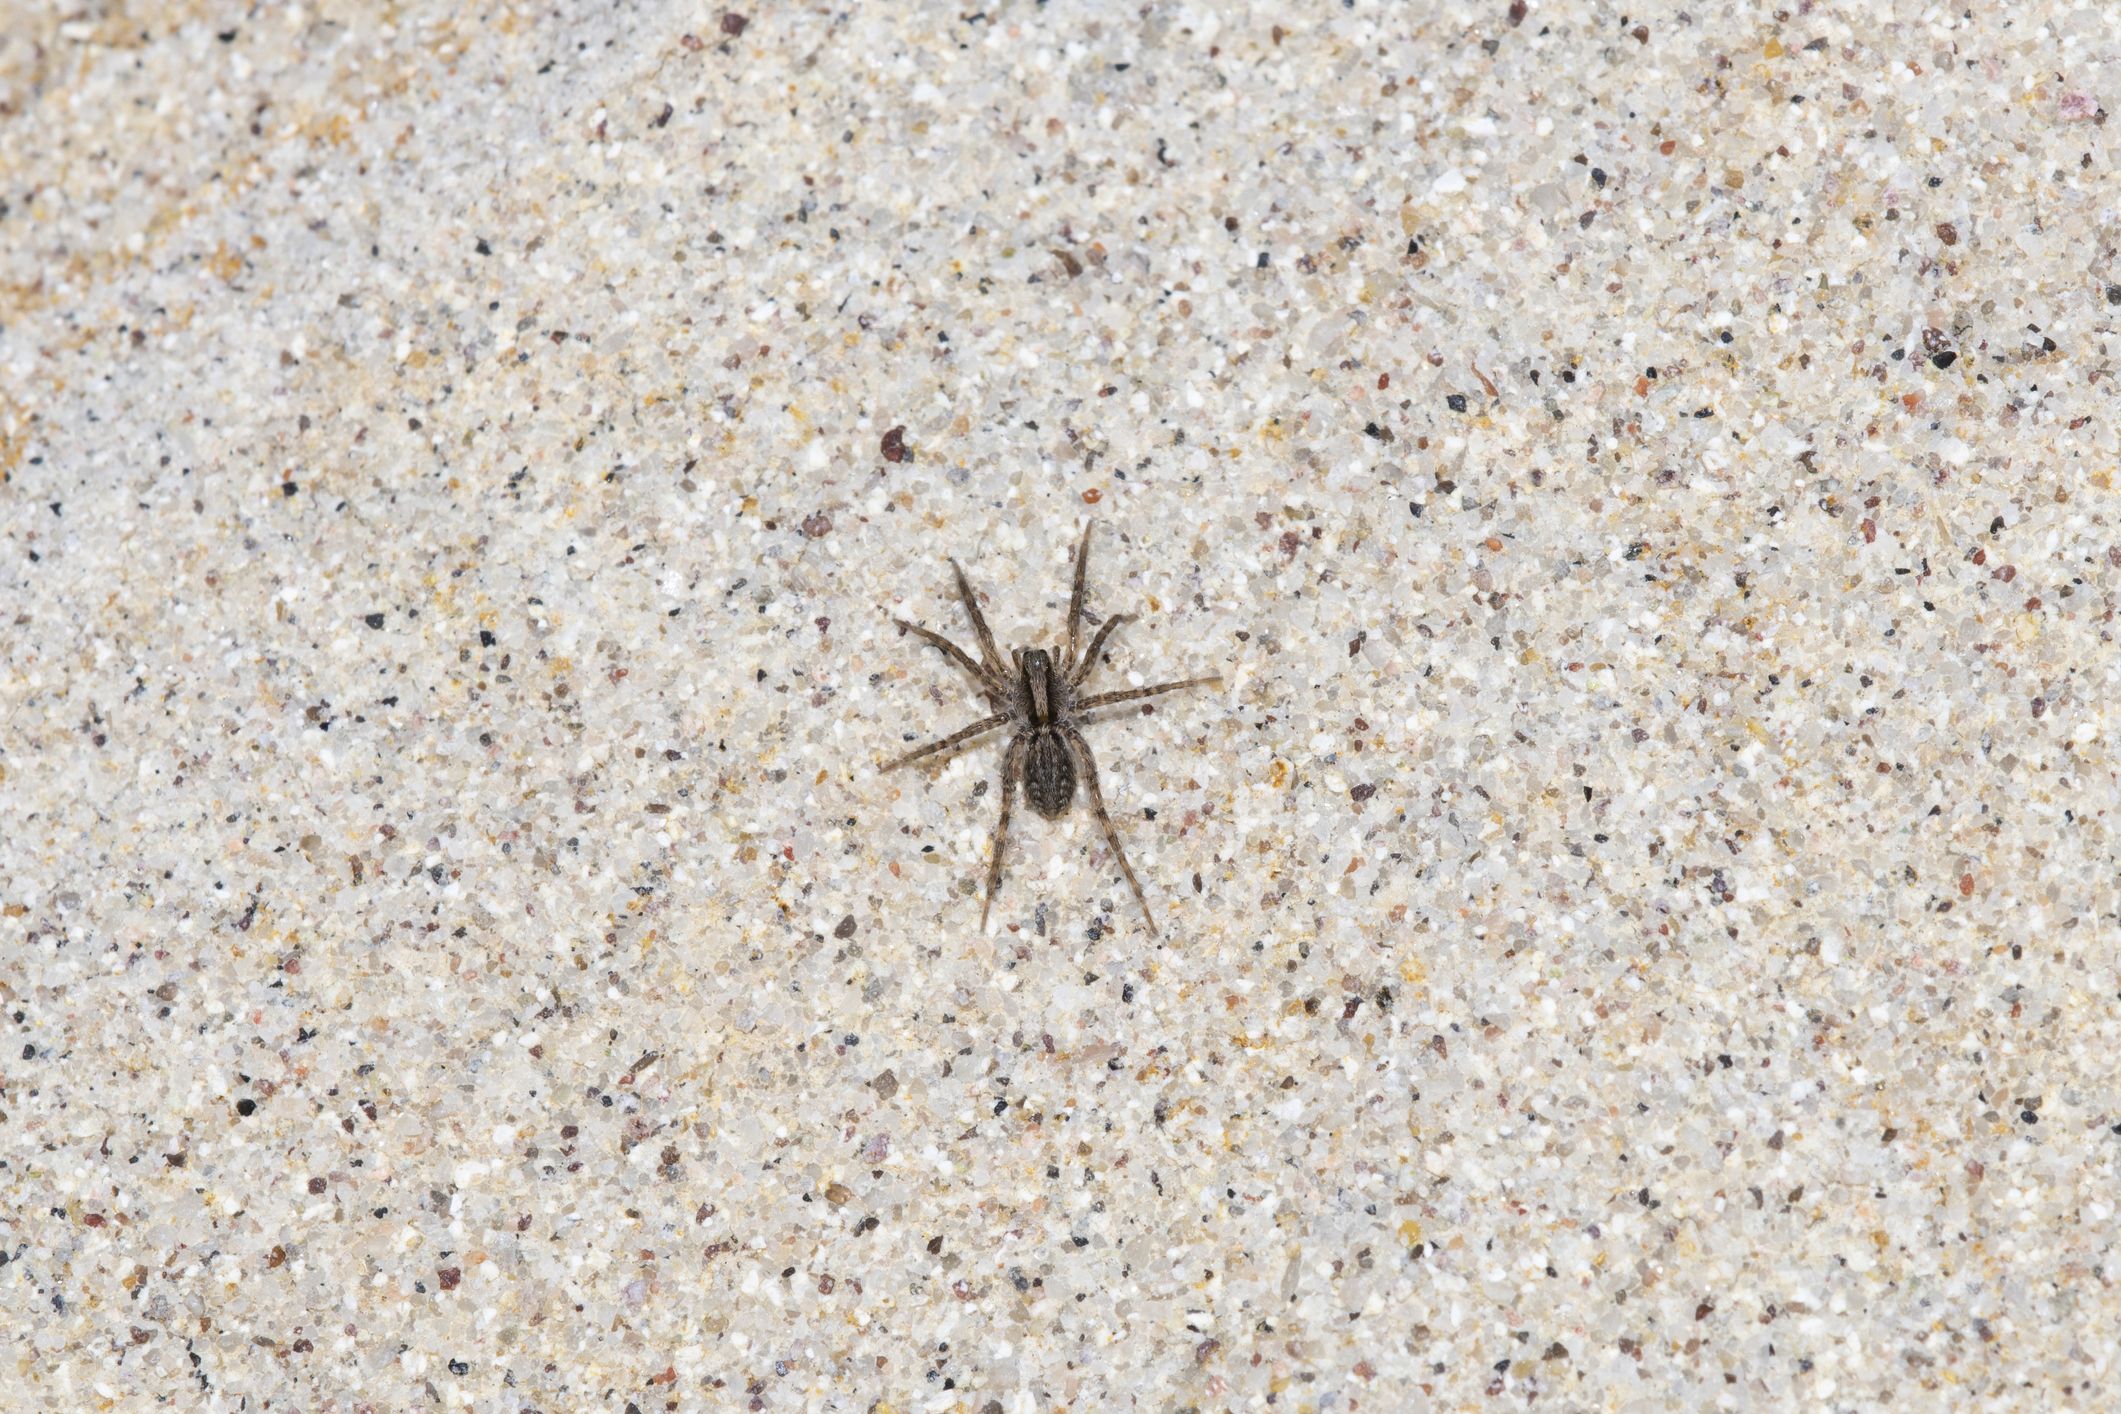 10 Common House Spiders Found in the UK